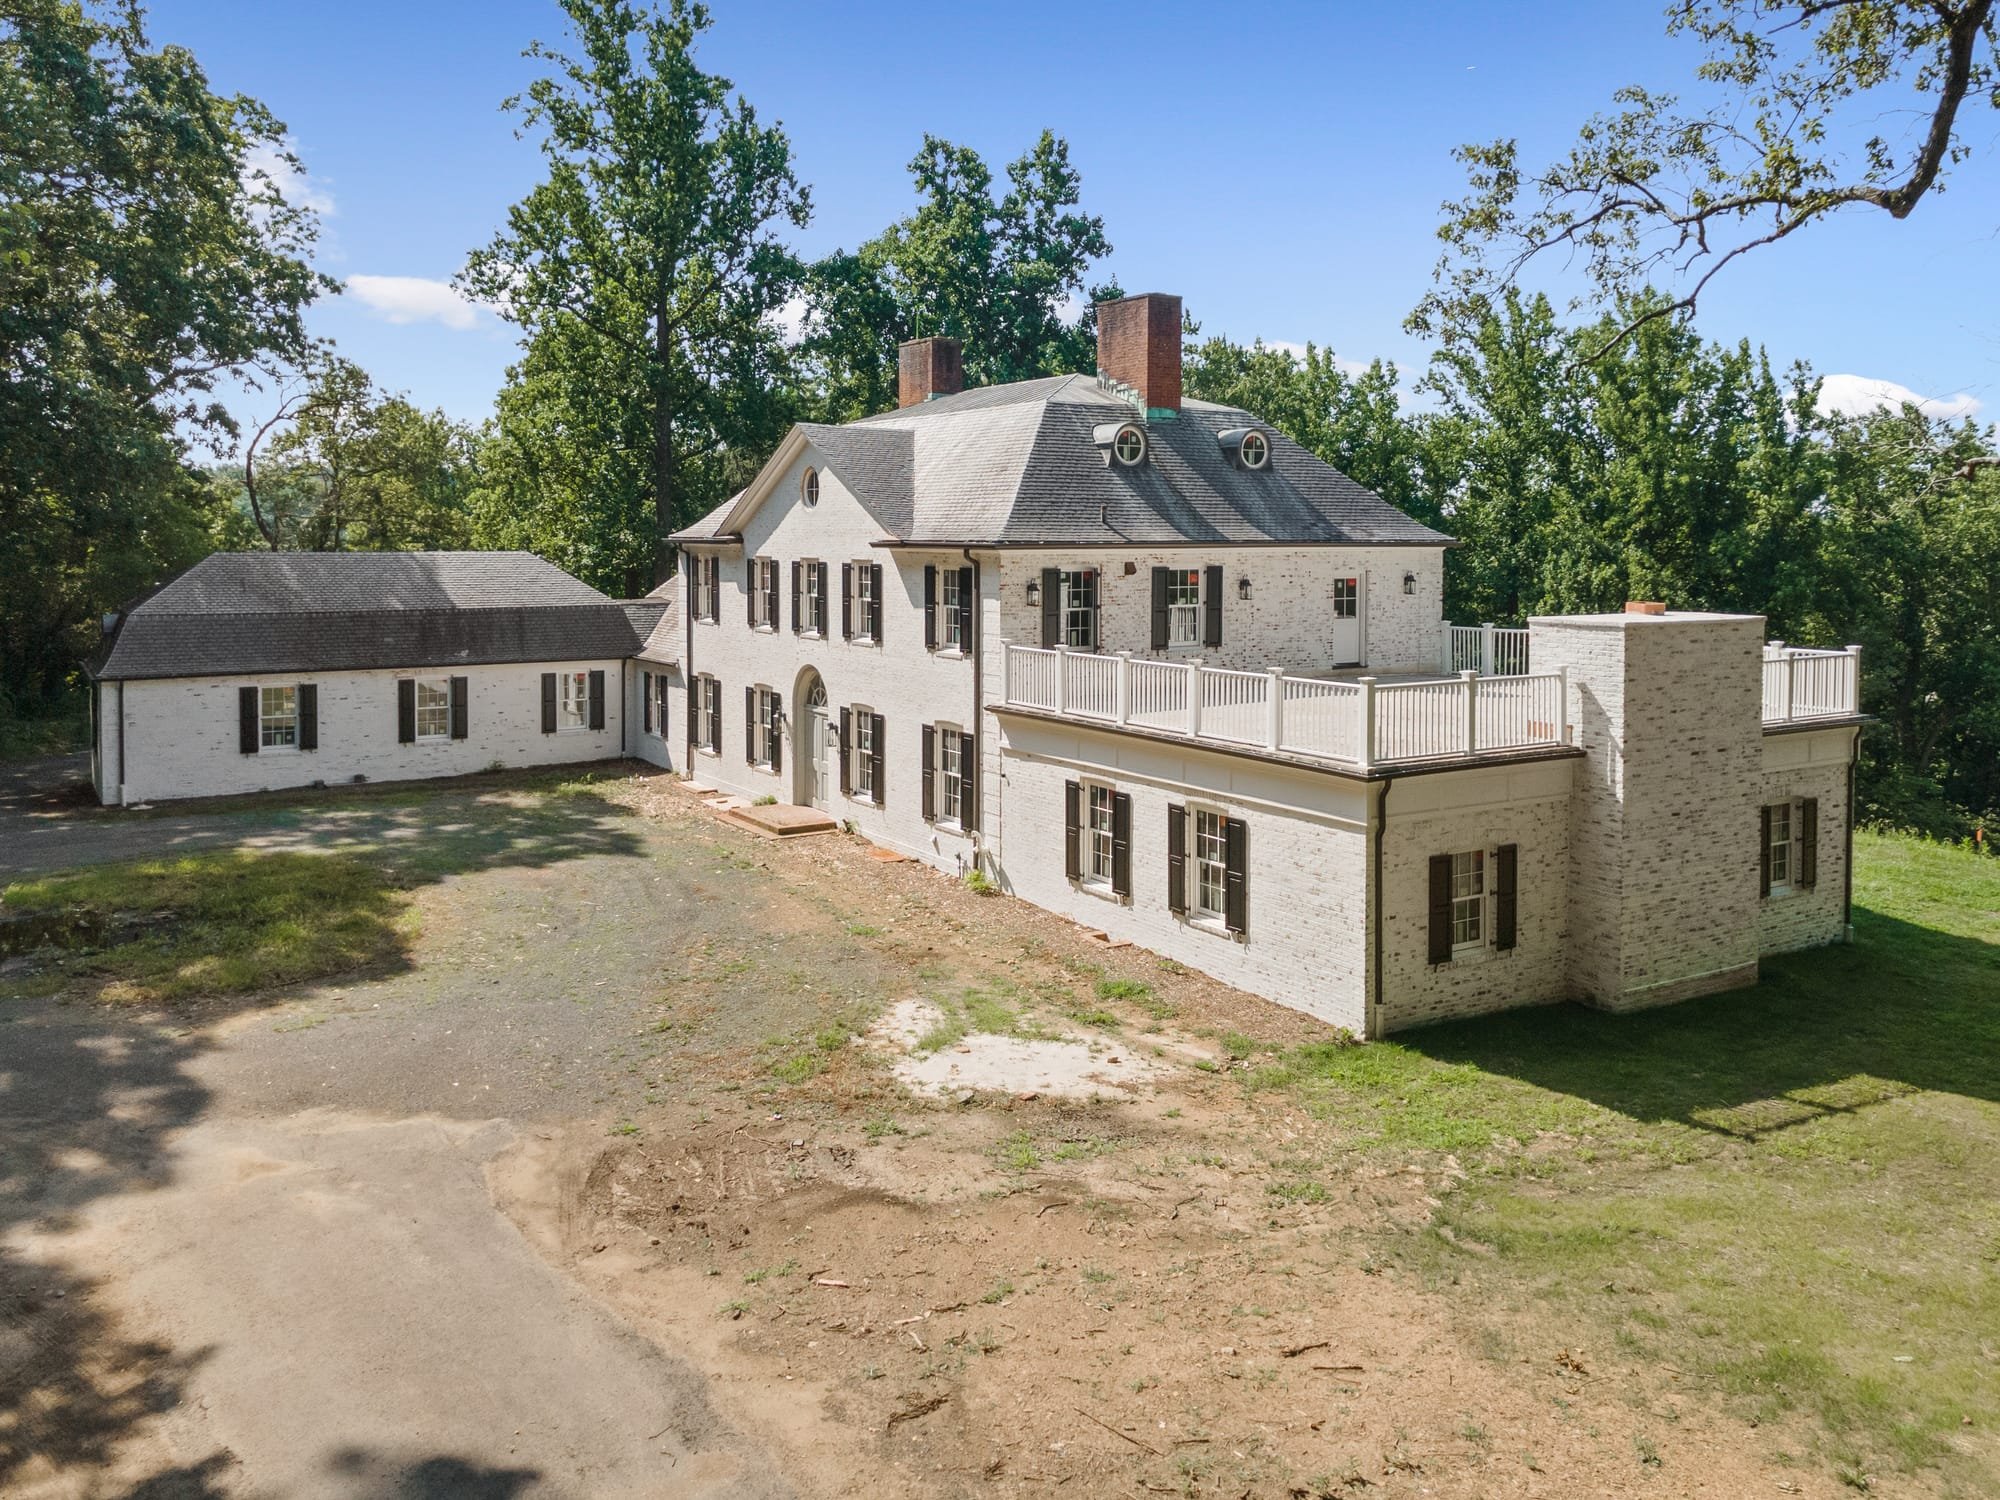 SOLD! 100 YEAR OLD HOME WITH 46 ACRES! $3,635,000 BERNARDSVILLE